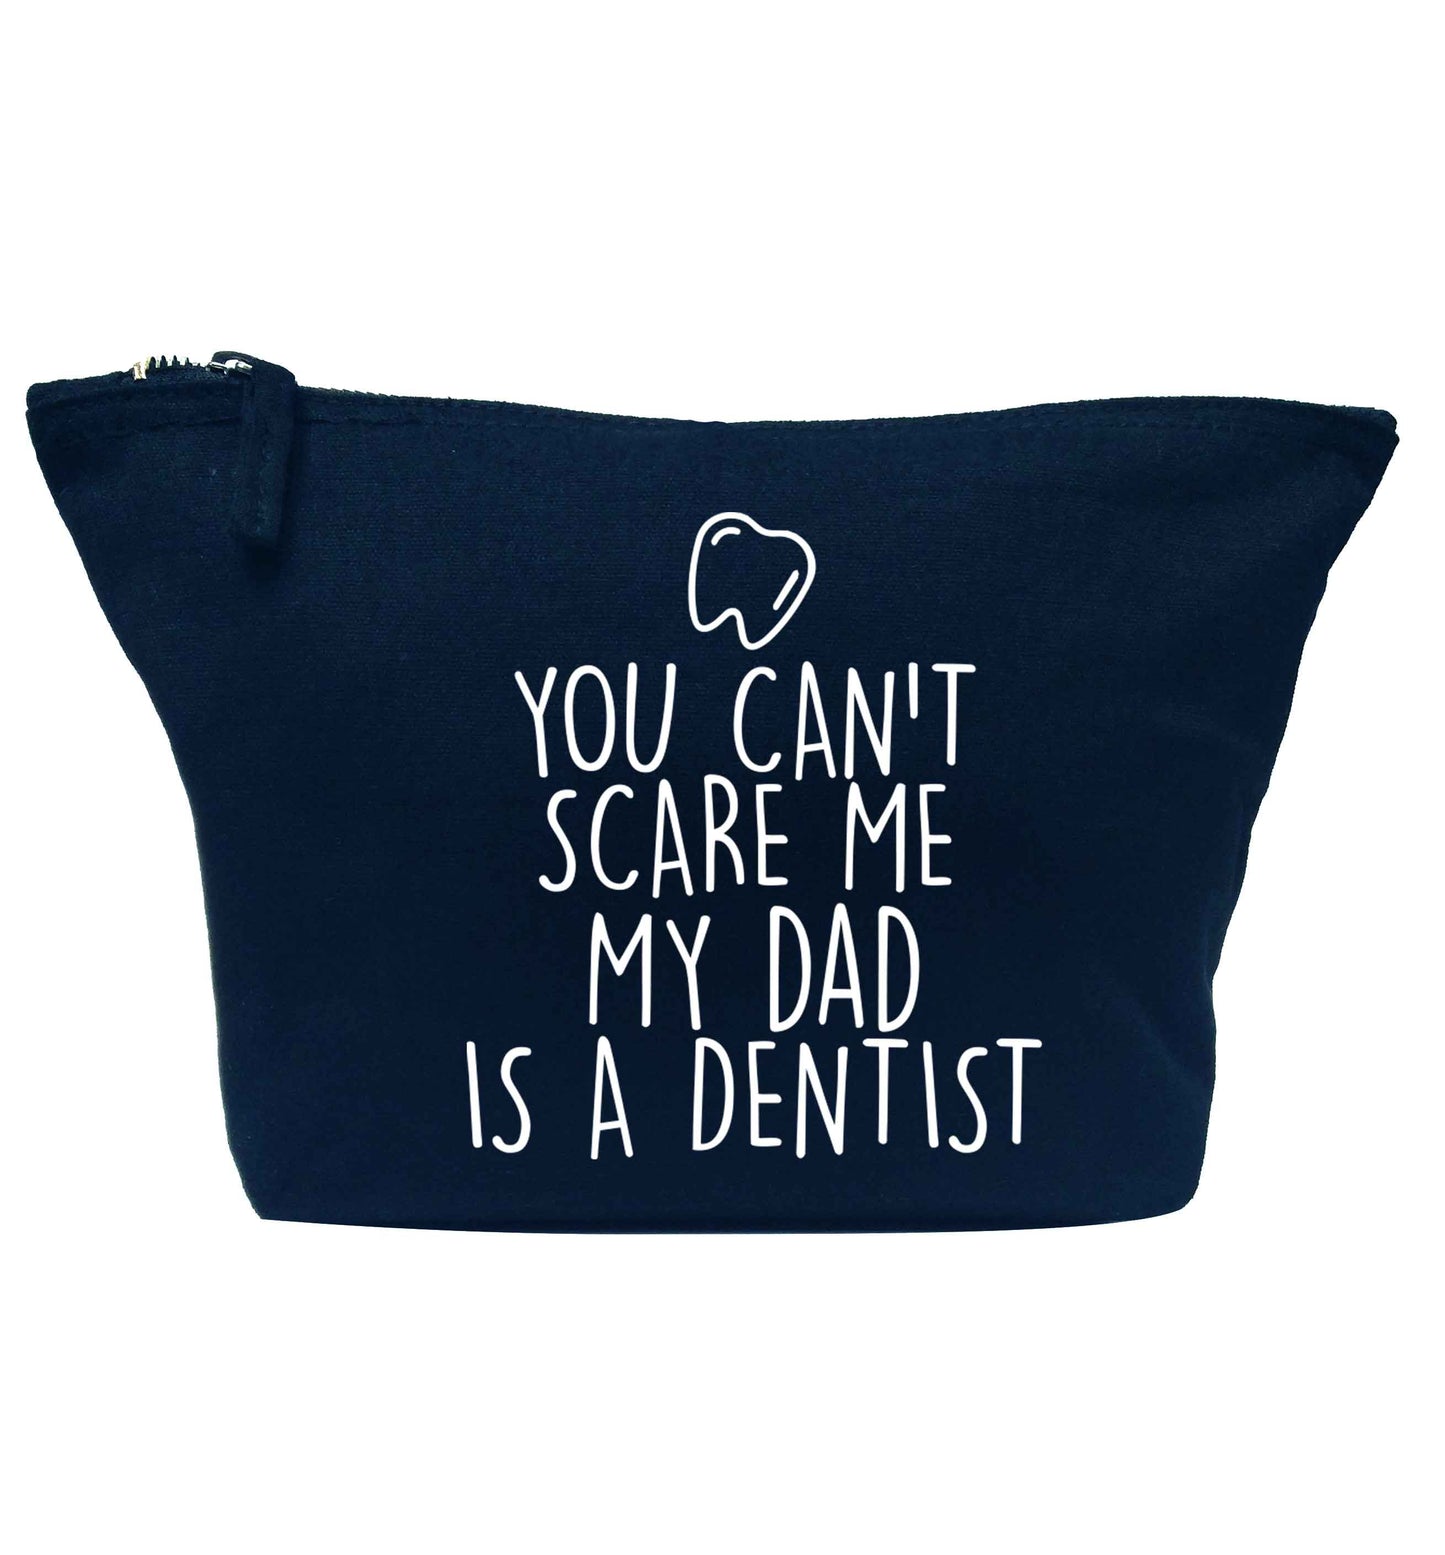 You can't scare me my dad is a dentist navy makeup bag